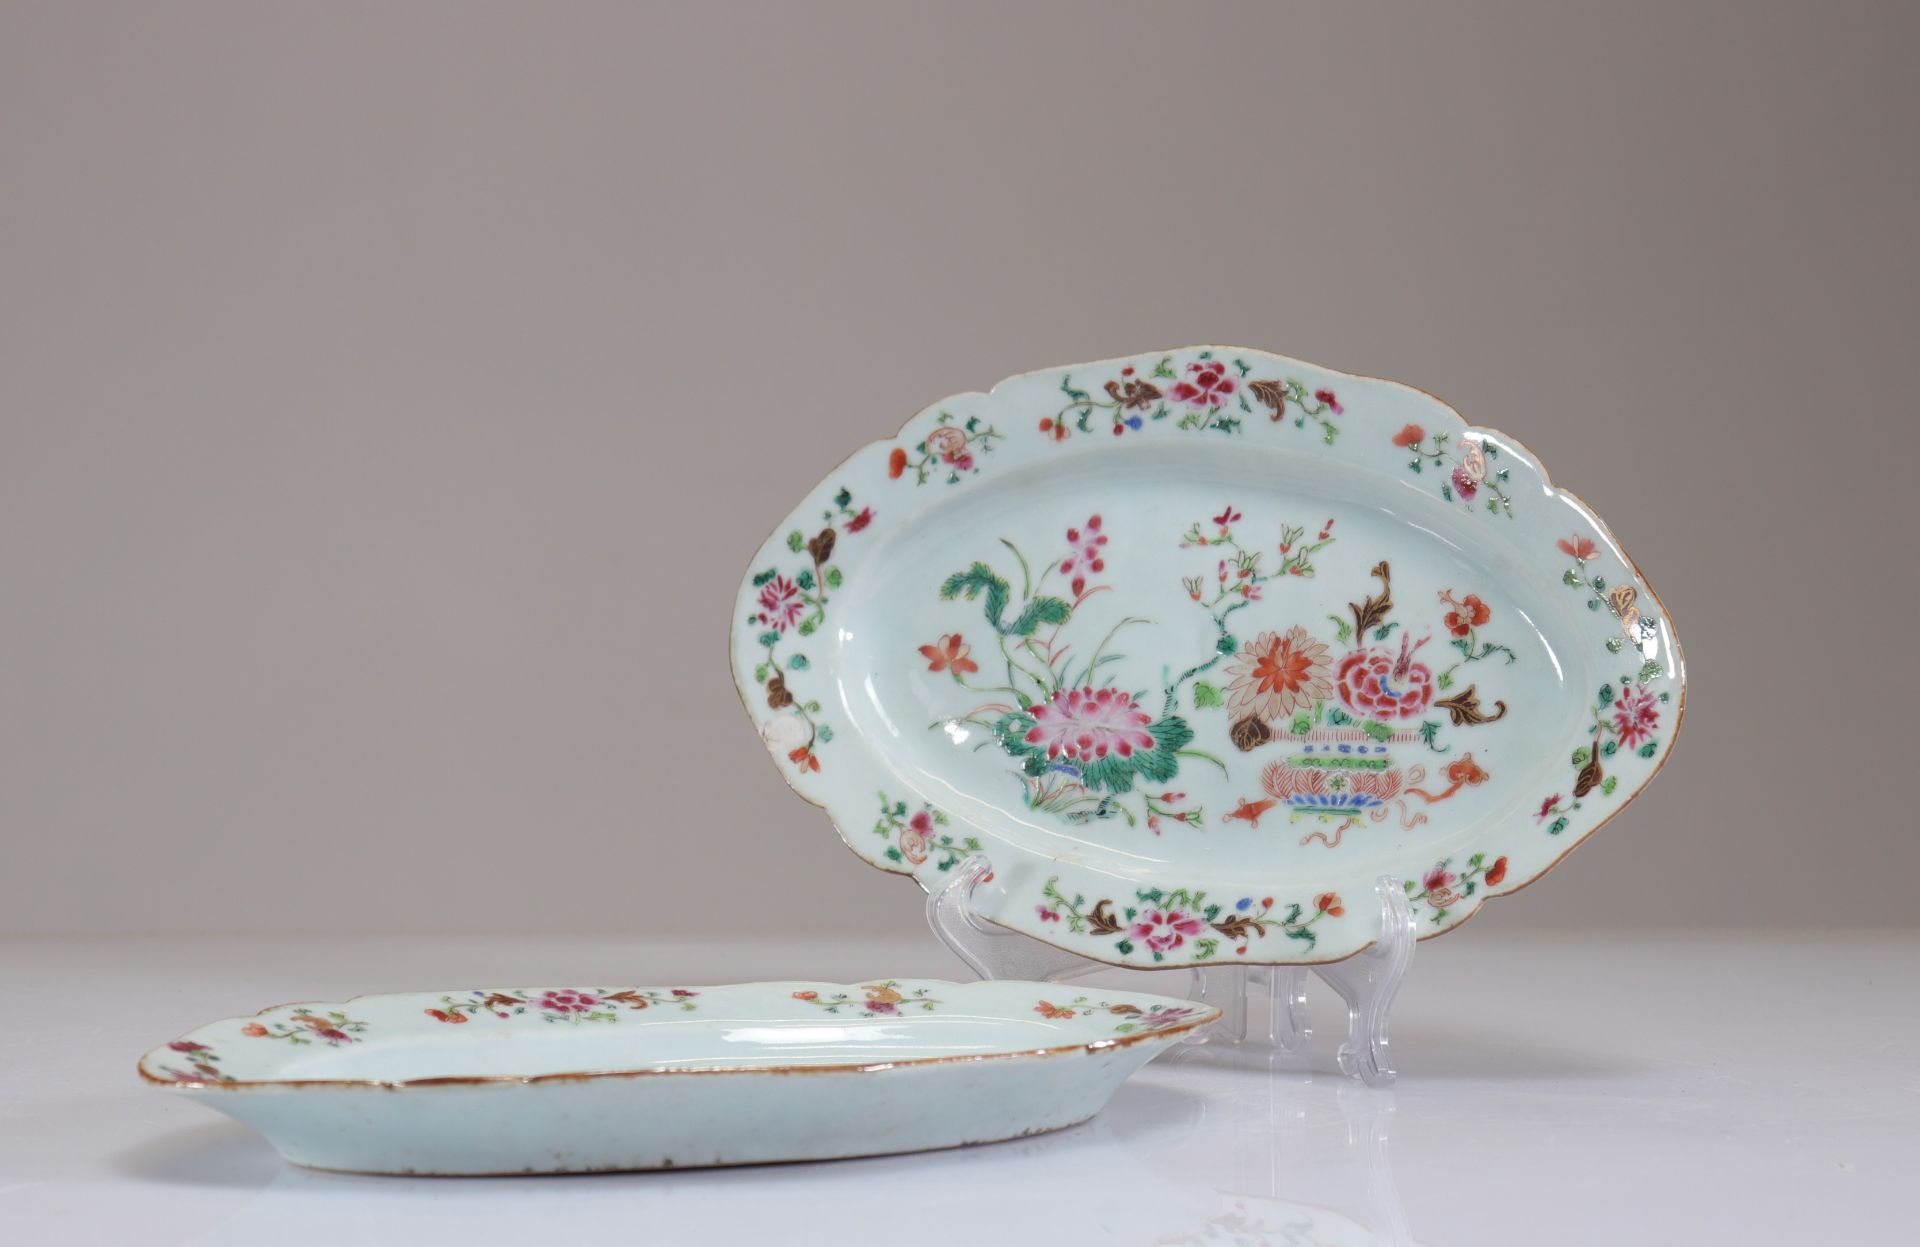 Set of two dishes in famille rose porcelain with floral decoration, 18th century - Image 2 of 3